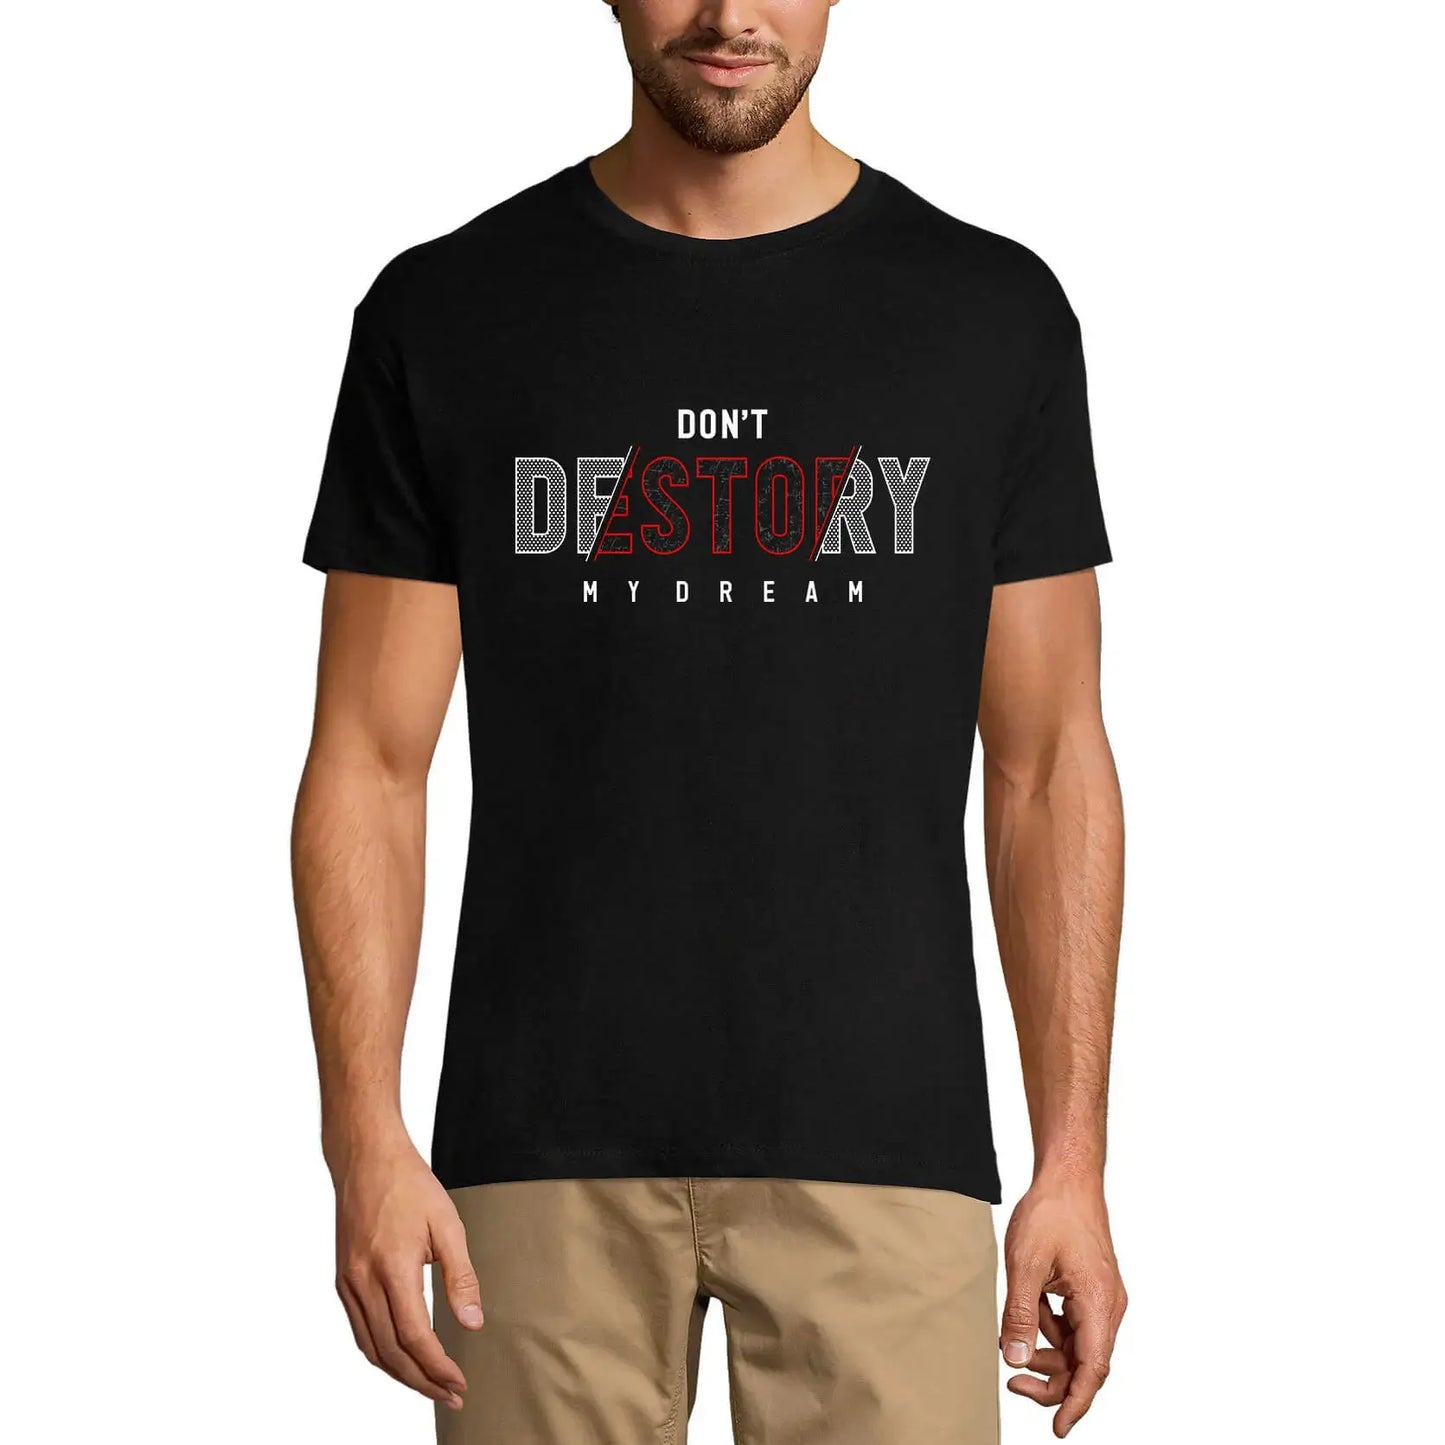 Men's Graphic T-Shirt Don't Destroy My Dream Eco-Friendly Limited Edition Short Sleeve Tee-Shirt Vintage Birthday Gift Novelty